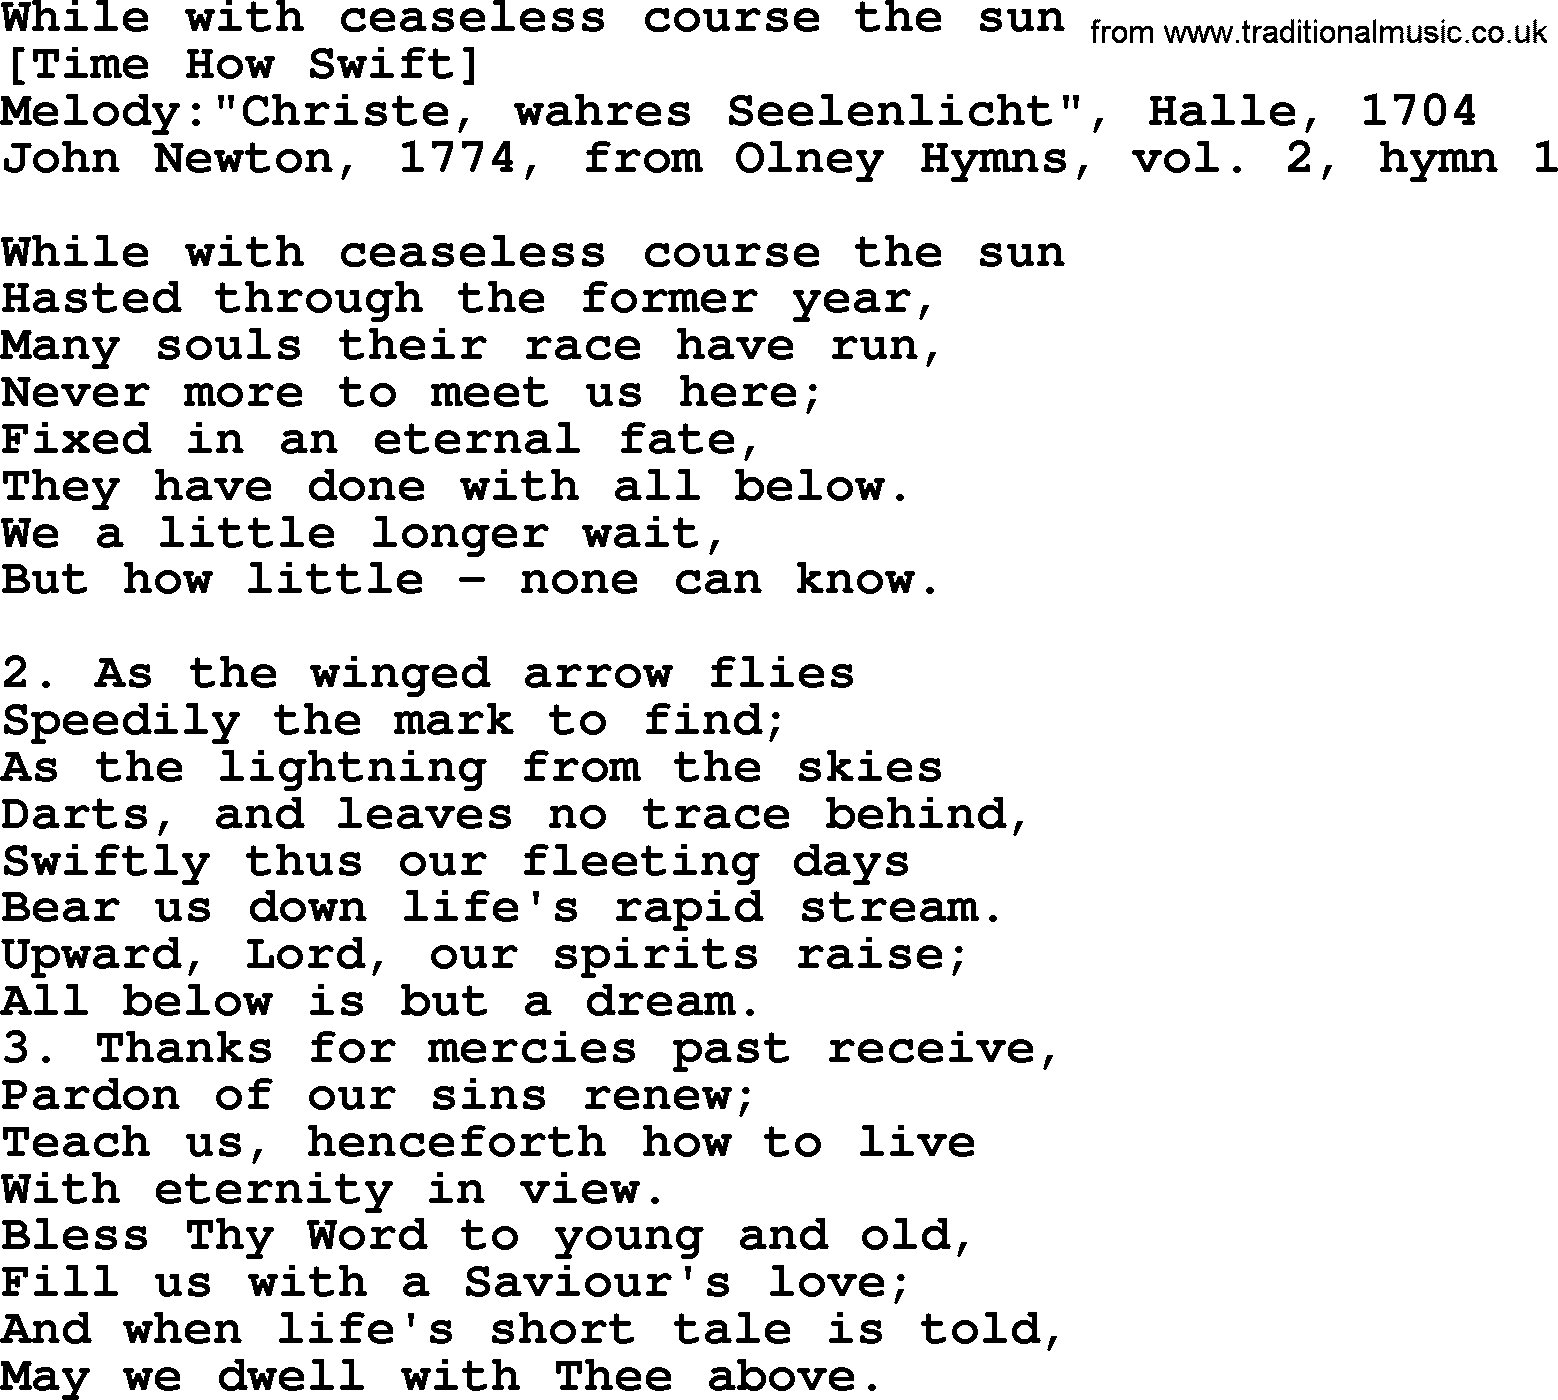 Old English Song: While With Ceaseless Course The Sun lyrics